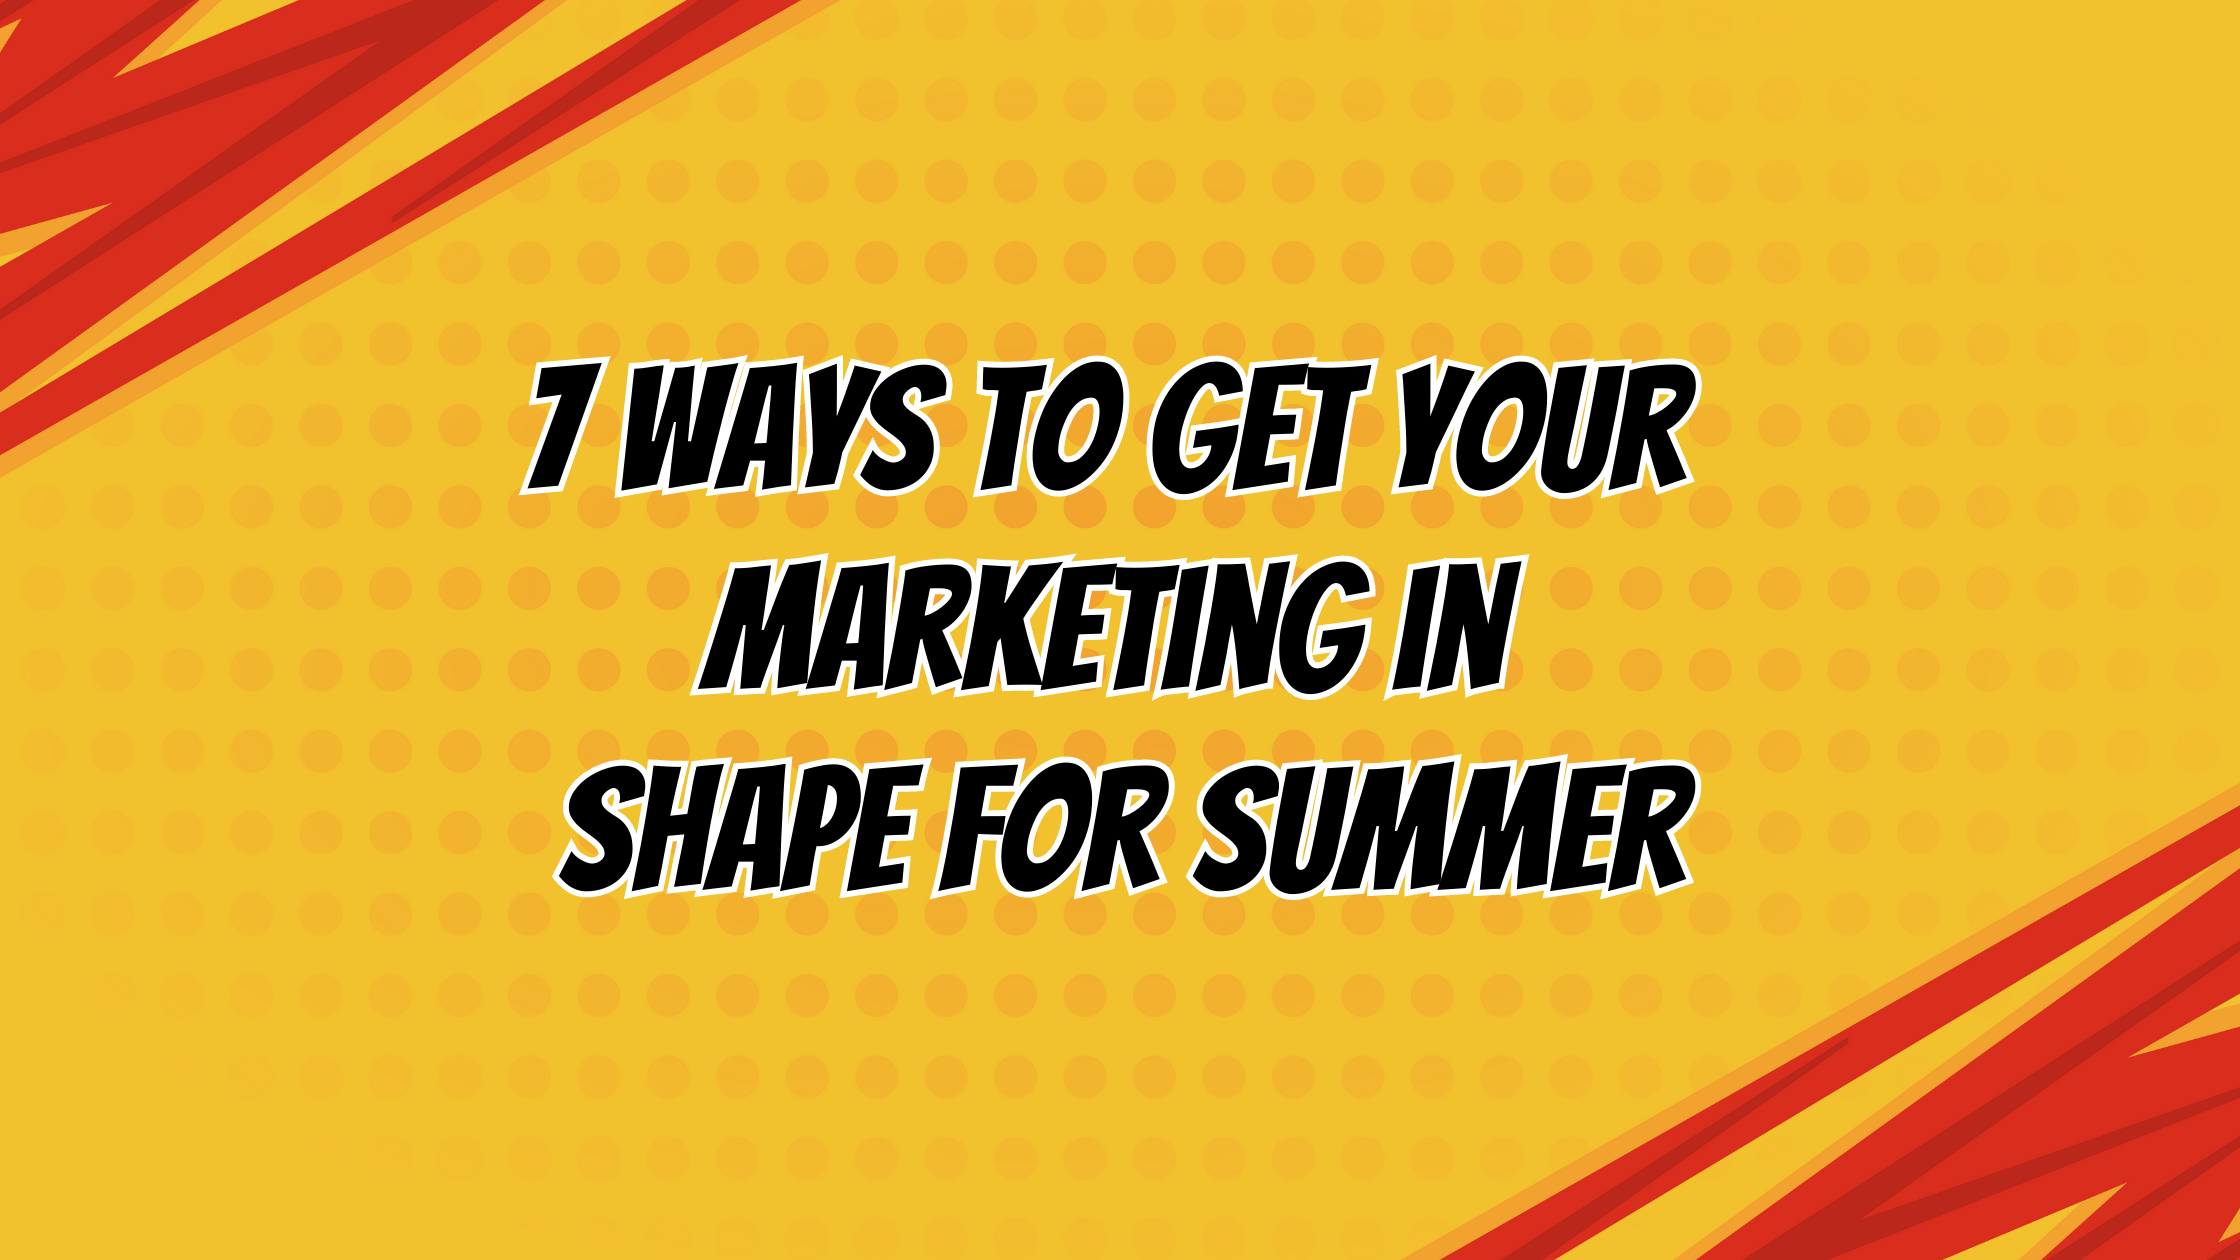 Comic book theme design with blog title "7 Ways to Get Your Marketing Strategy in Shape for Summer"